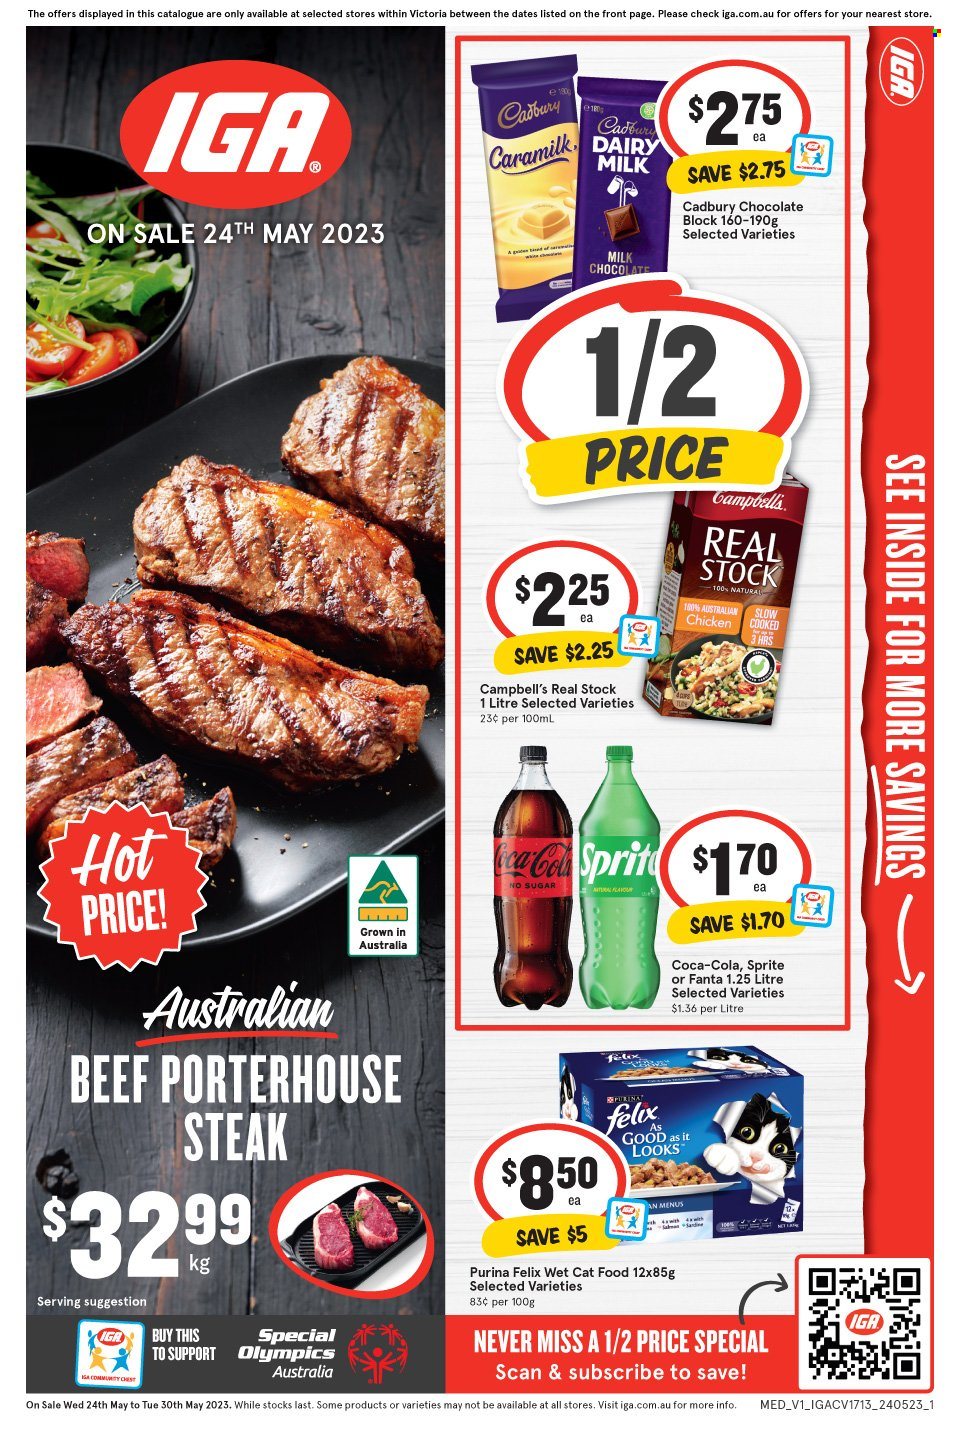 thumbnail - IGA Catalogue - 24 May 2023 - 30 May 2023 - Sales products - Campbell's, milk chocolate, chocolate, Cadbury, Dairy Milk, Coca-Cola, Sprite, Fanta, soft drink, chicken, steak, animal food, cat food, Purina, Felix, wet cat food. Page 1.